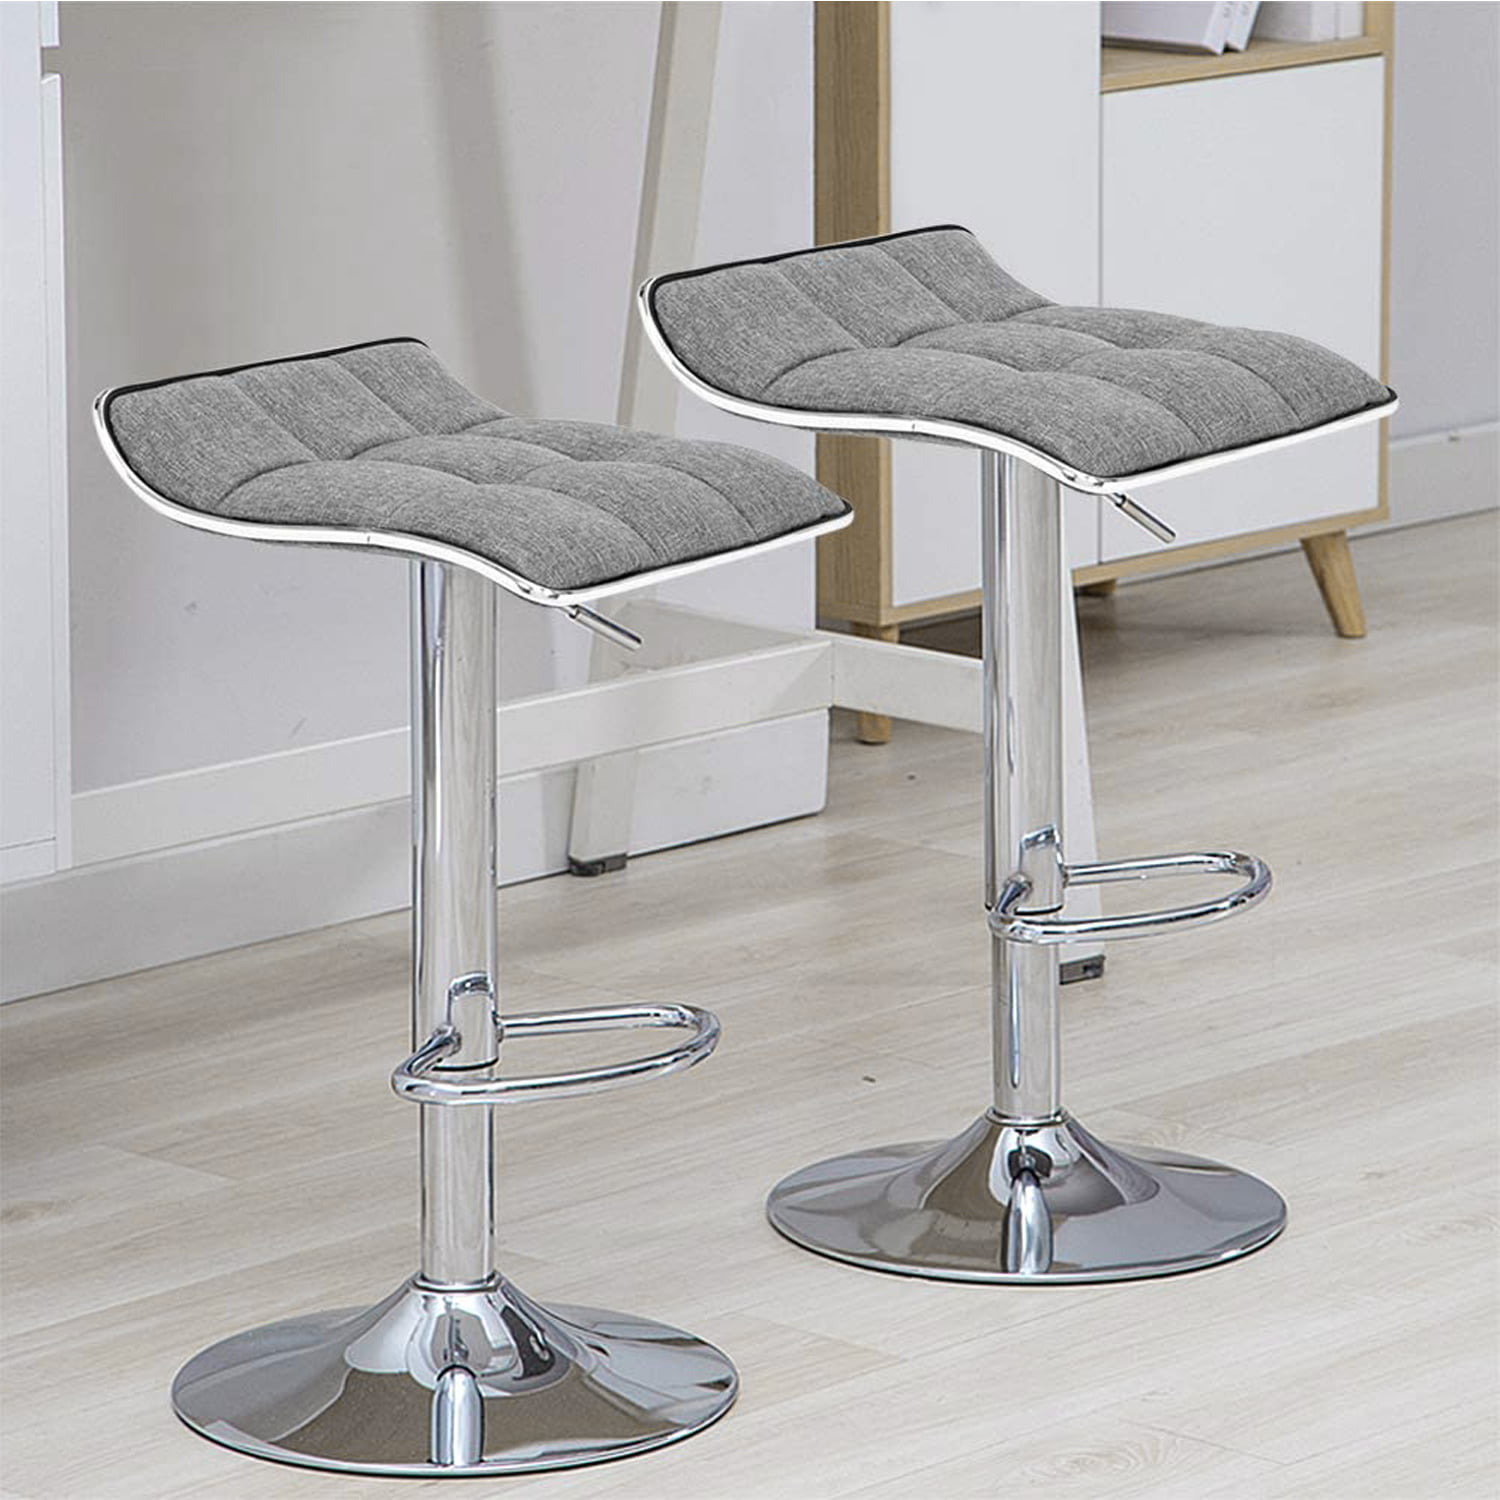 Velvet Upholstered with Black Metal Base Bar Stools Set of 3 Counter Height Barstools with Footrest & Back Height 26/Set of 3, Grey for Kitchen Breakfast Pub Café Counter Home Dining Chair